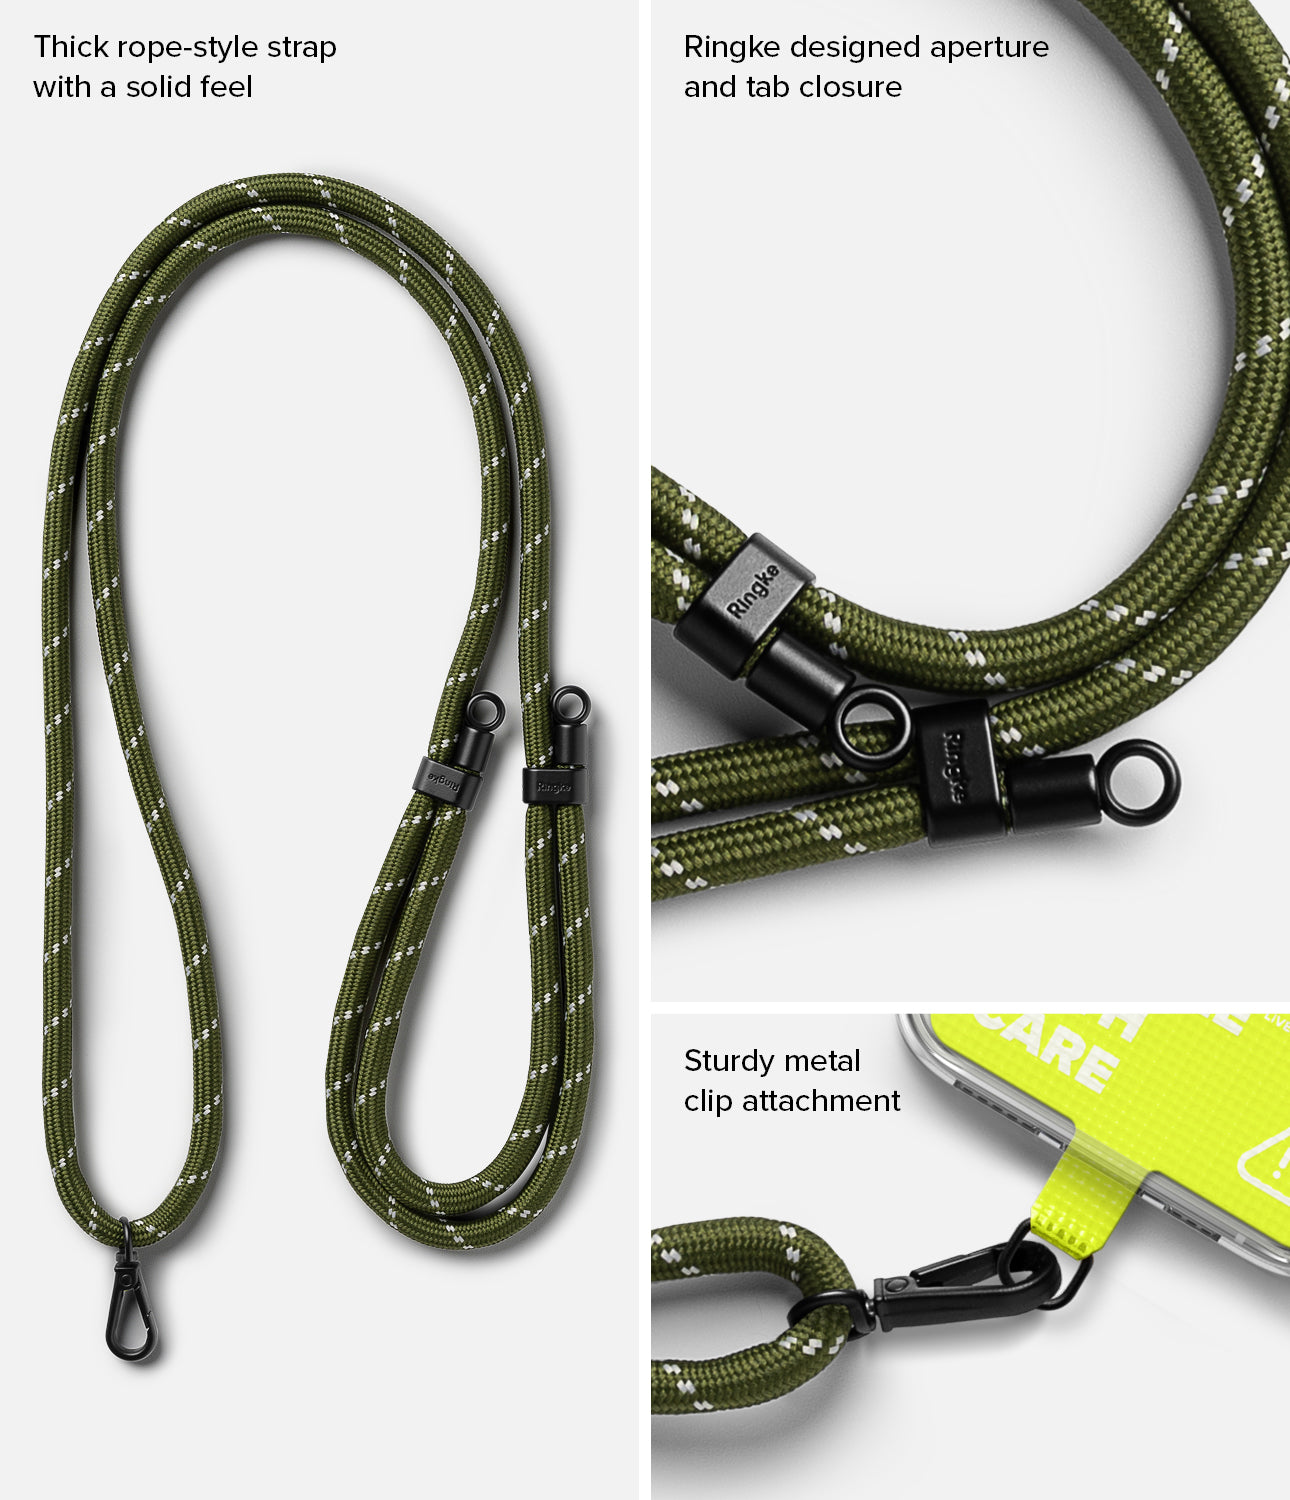 Thick rope-style strap with a solid feel, Ringke designed aperture and tab closure, Sturdy metal slip attachment